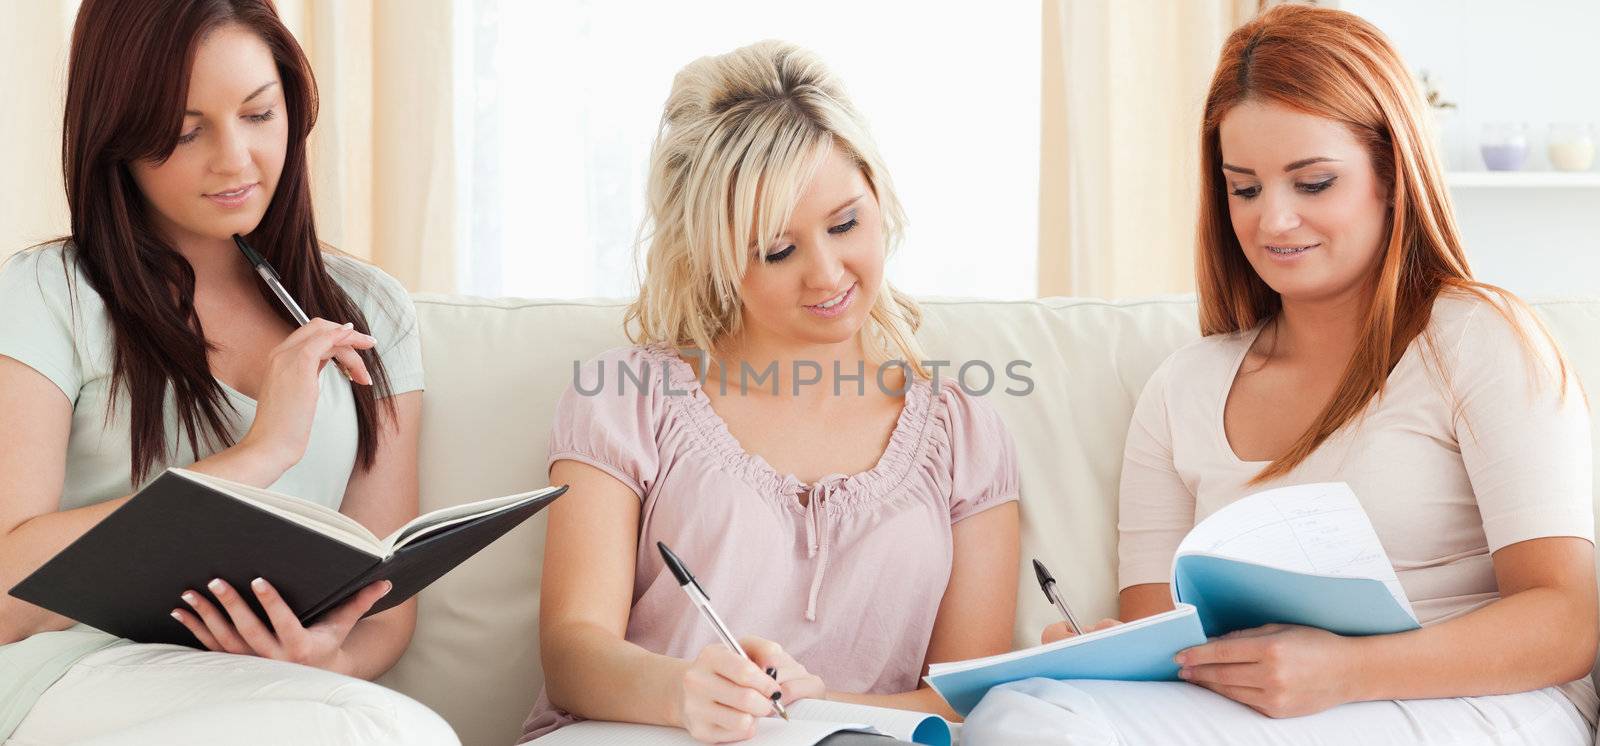 Charming women studying together in a living room